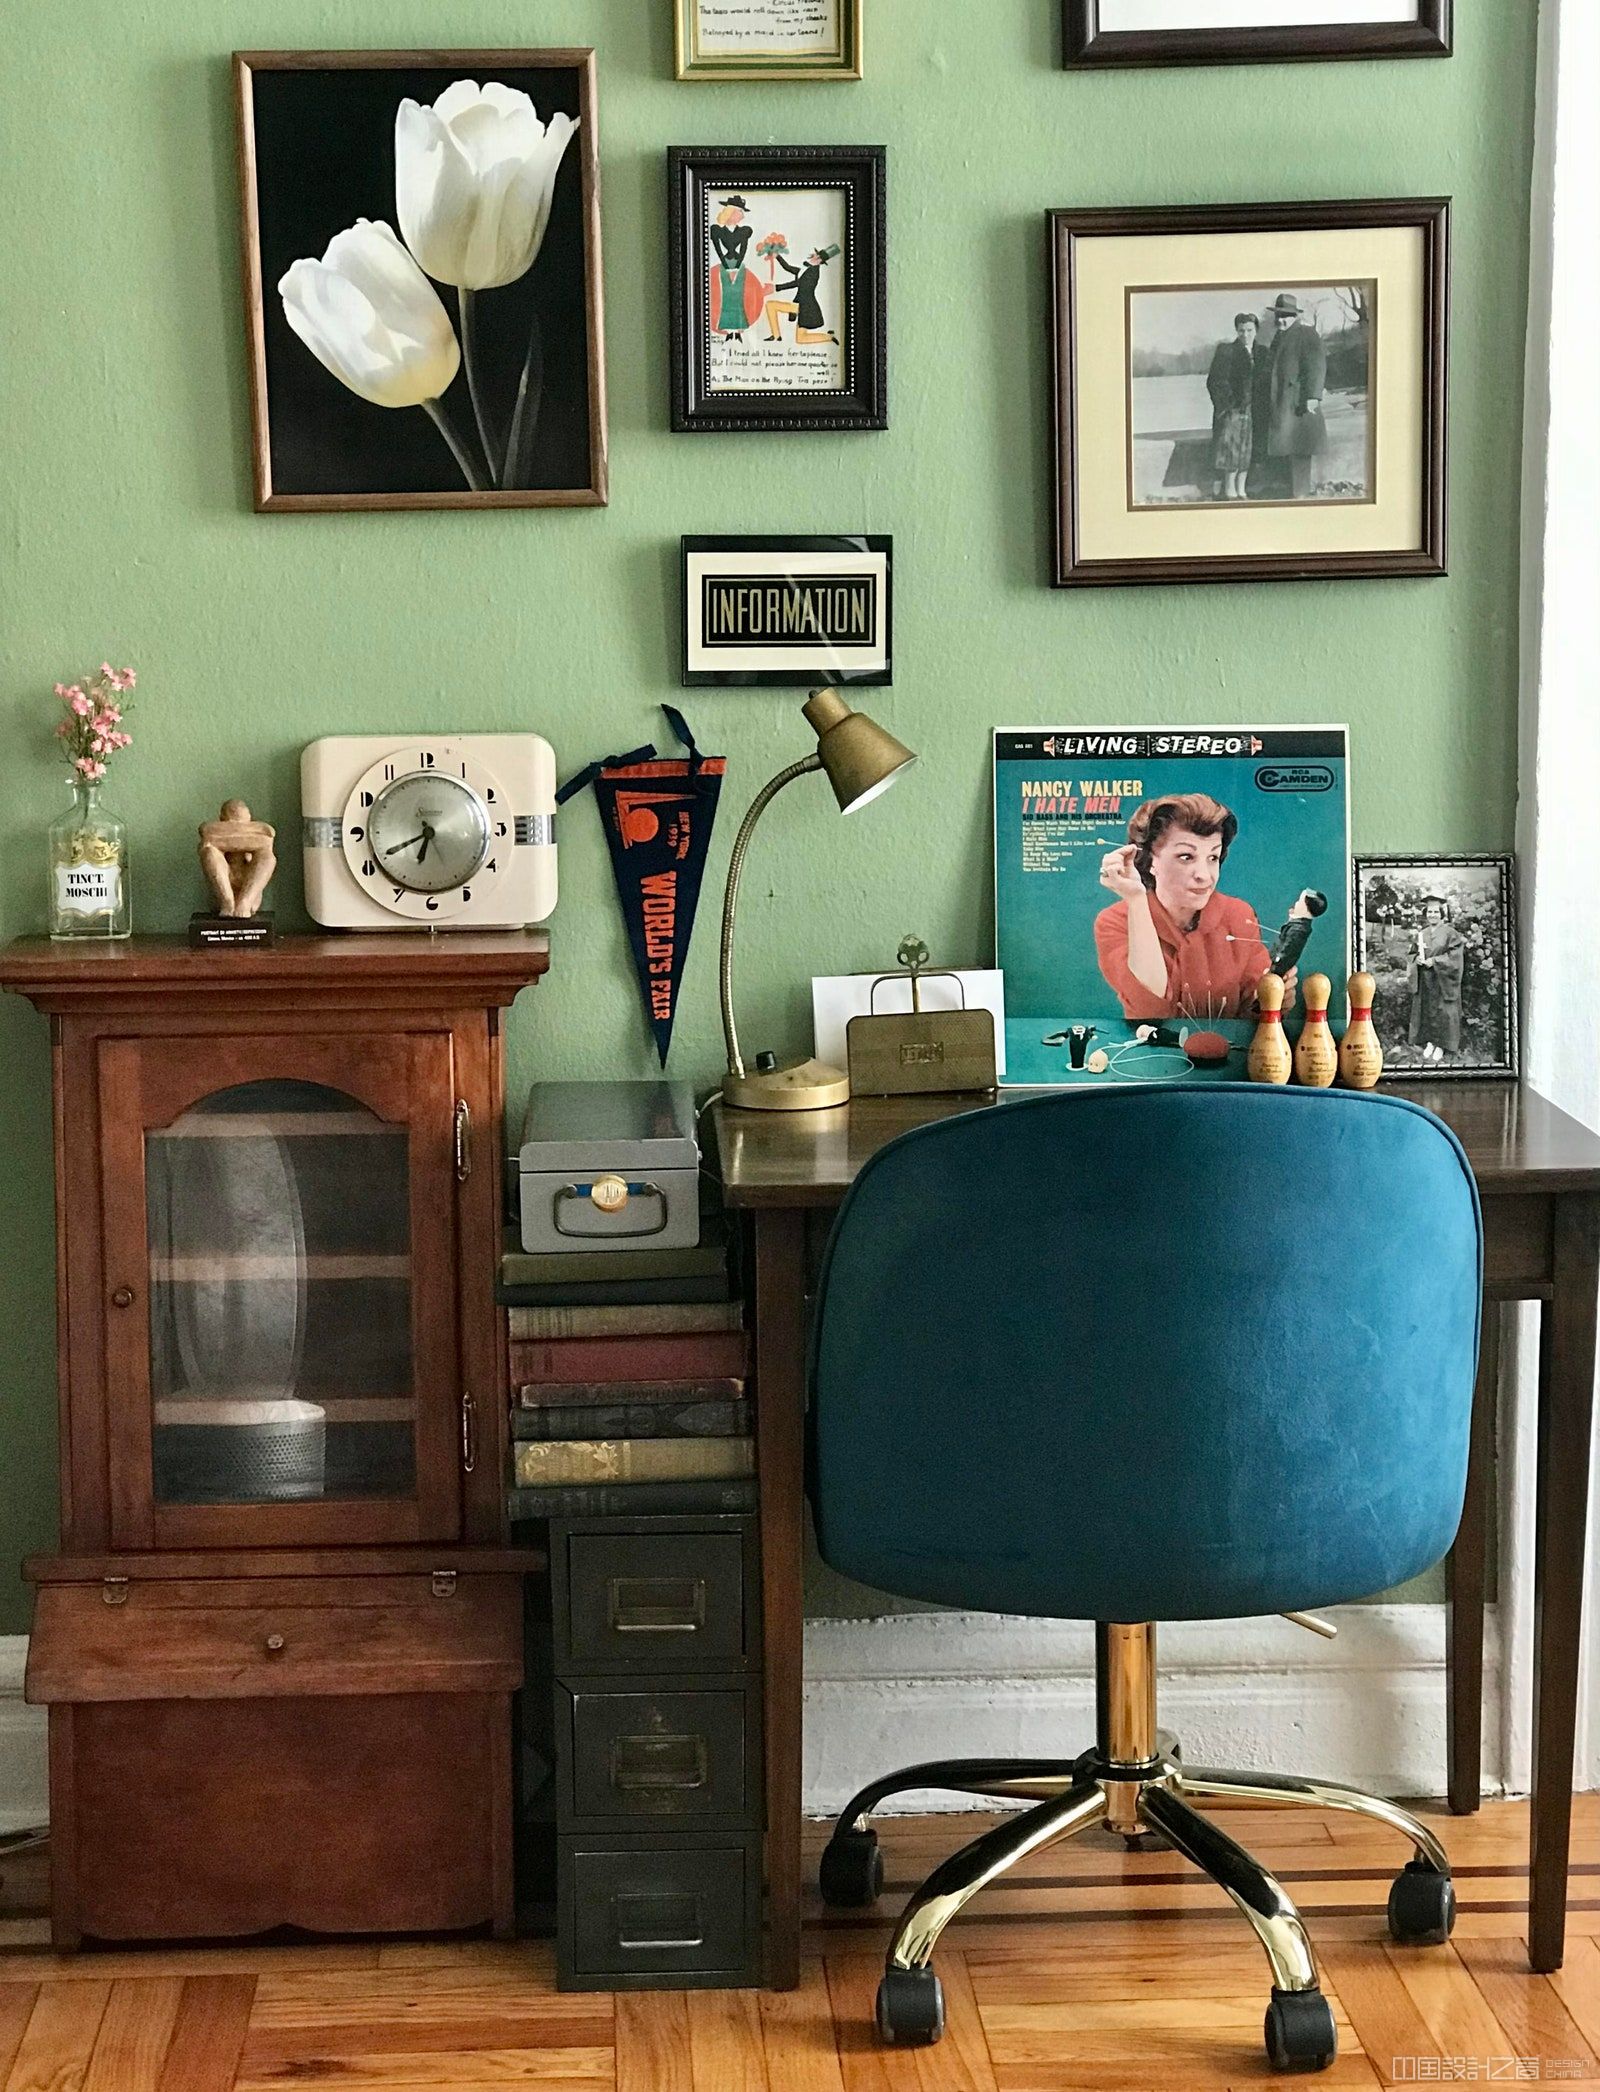 The author's home office co<em></em>nsists primarily of flea market and estate sale finds along with a few family photos and a...